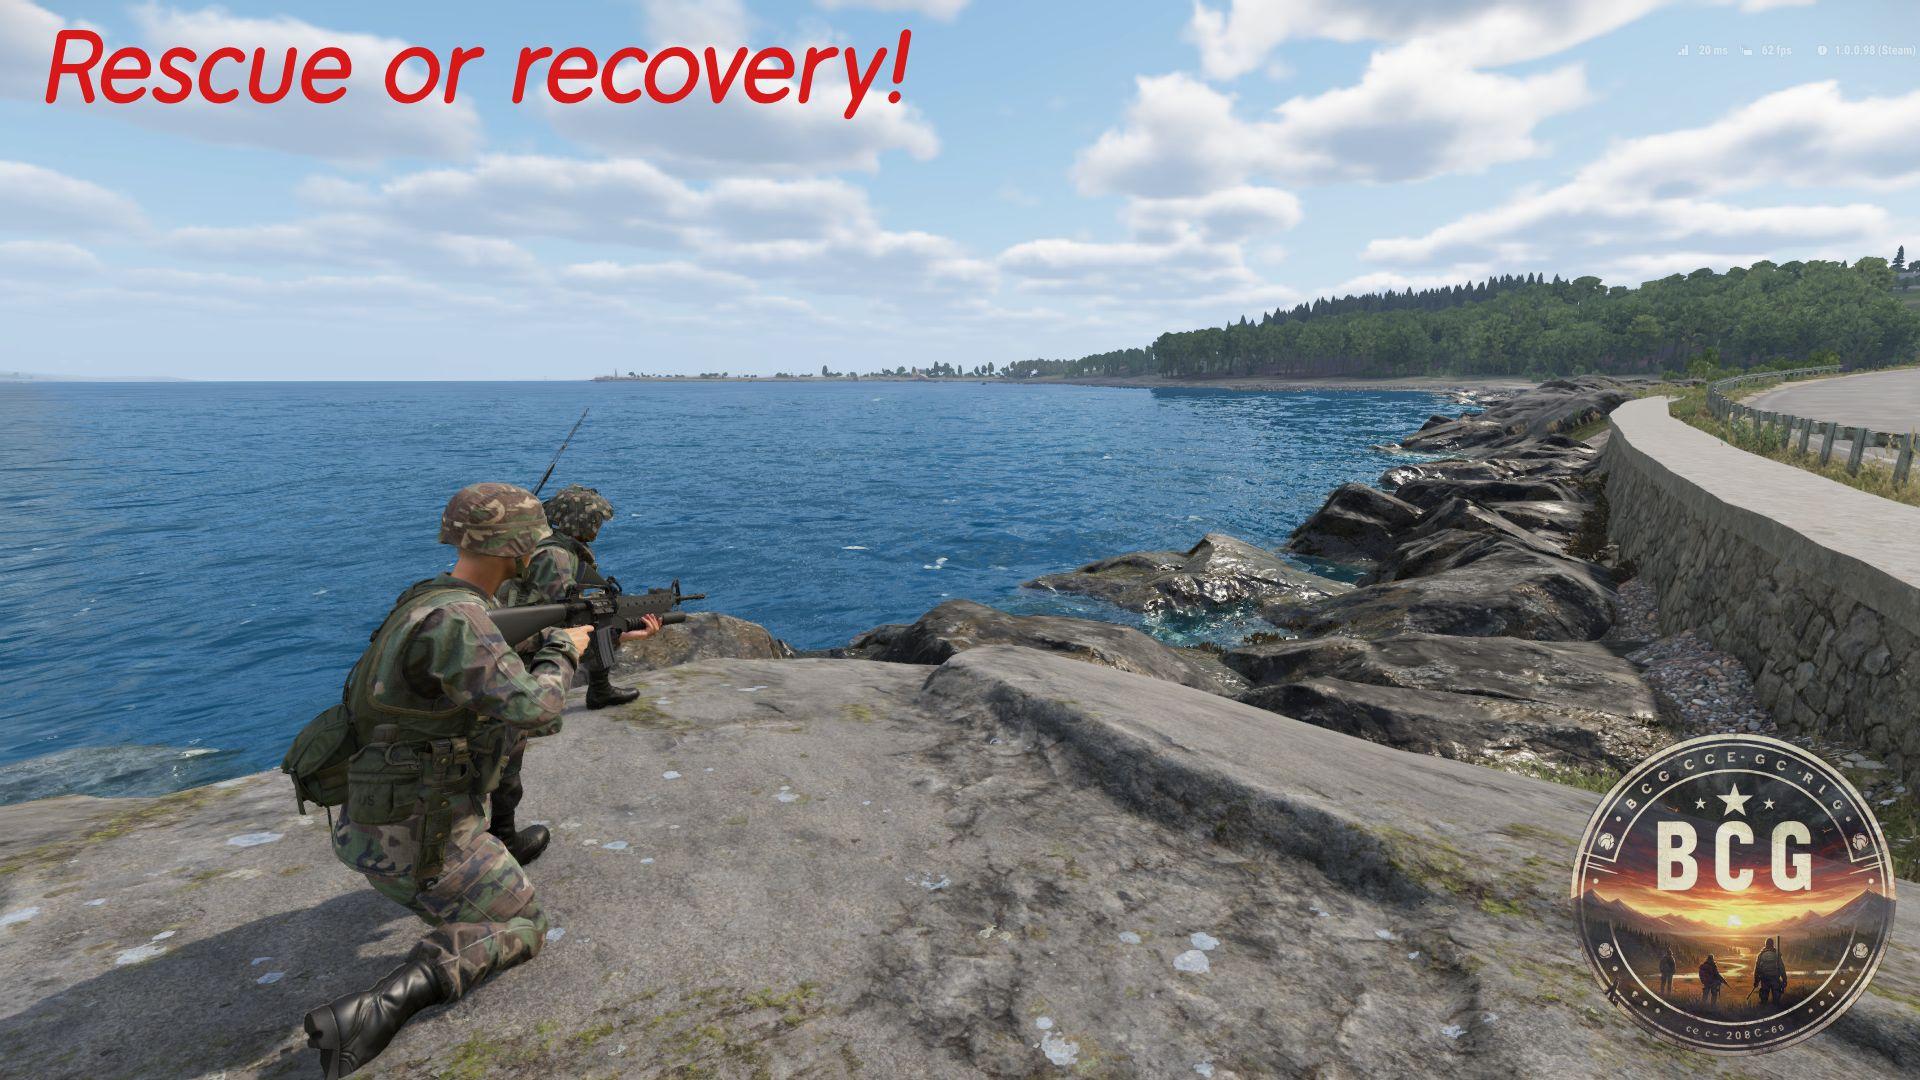 BCG Rescue or recovery